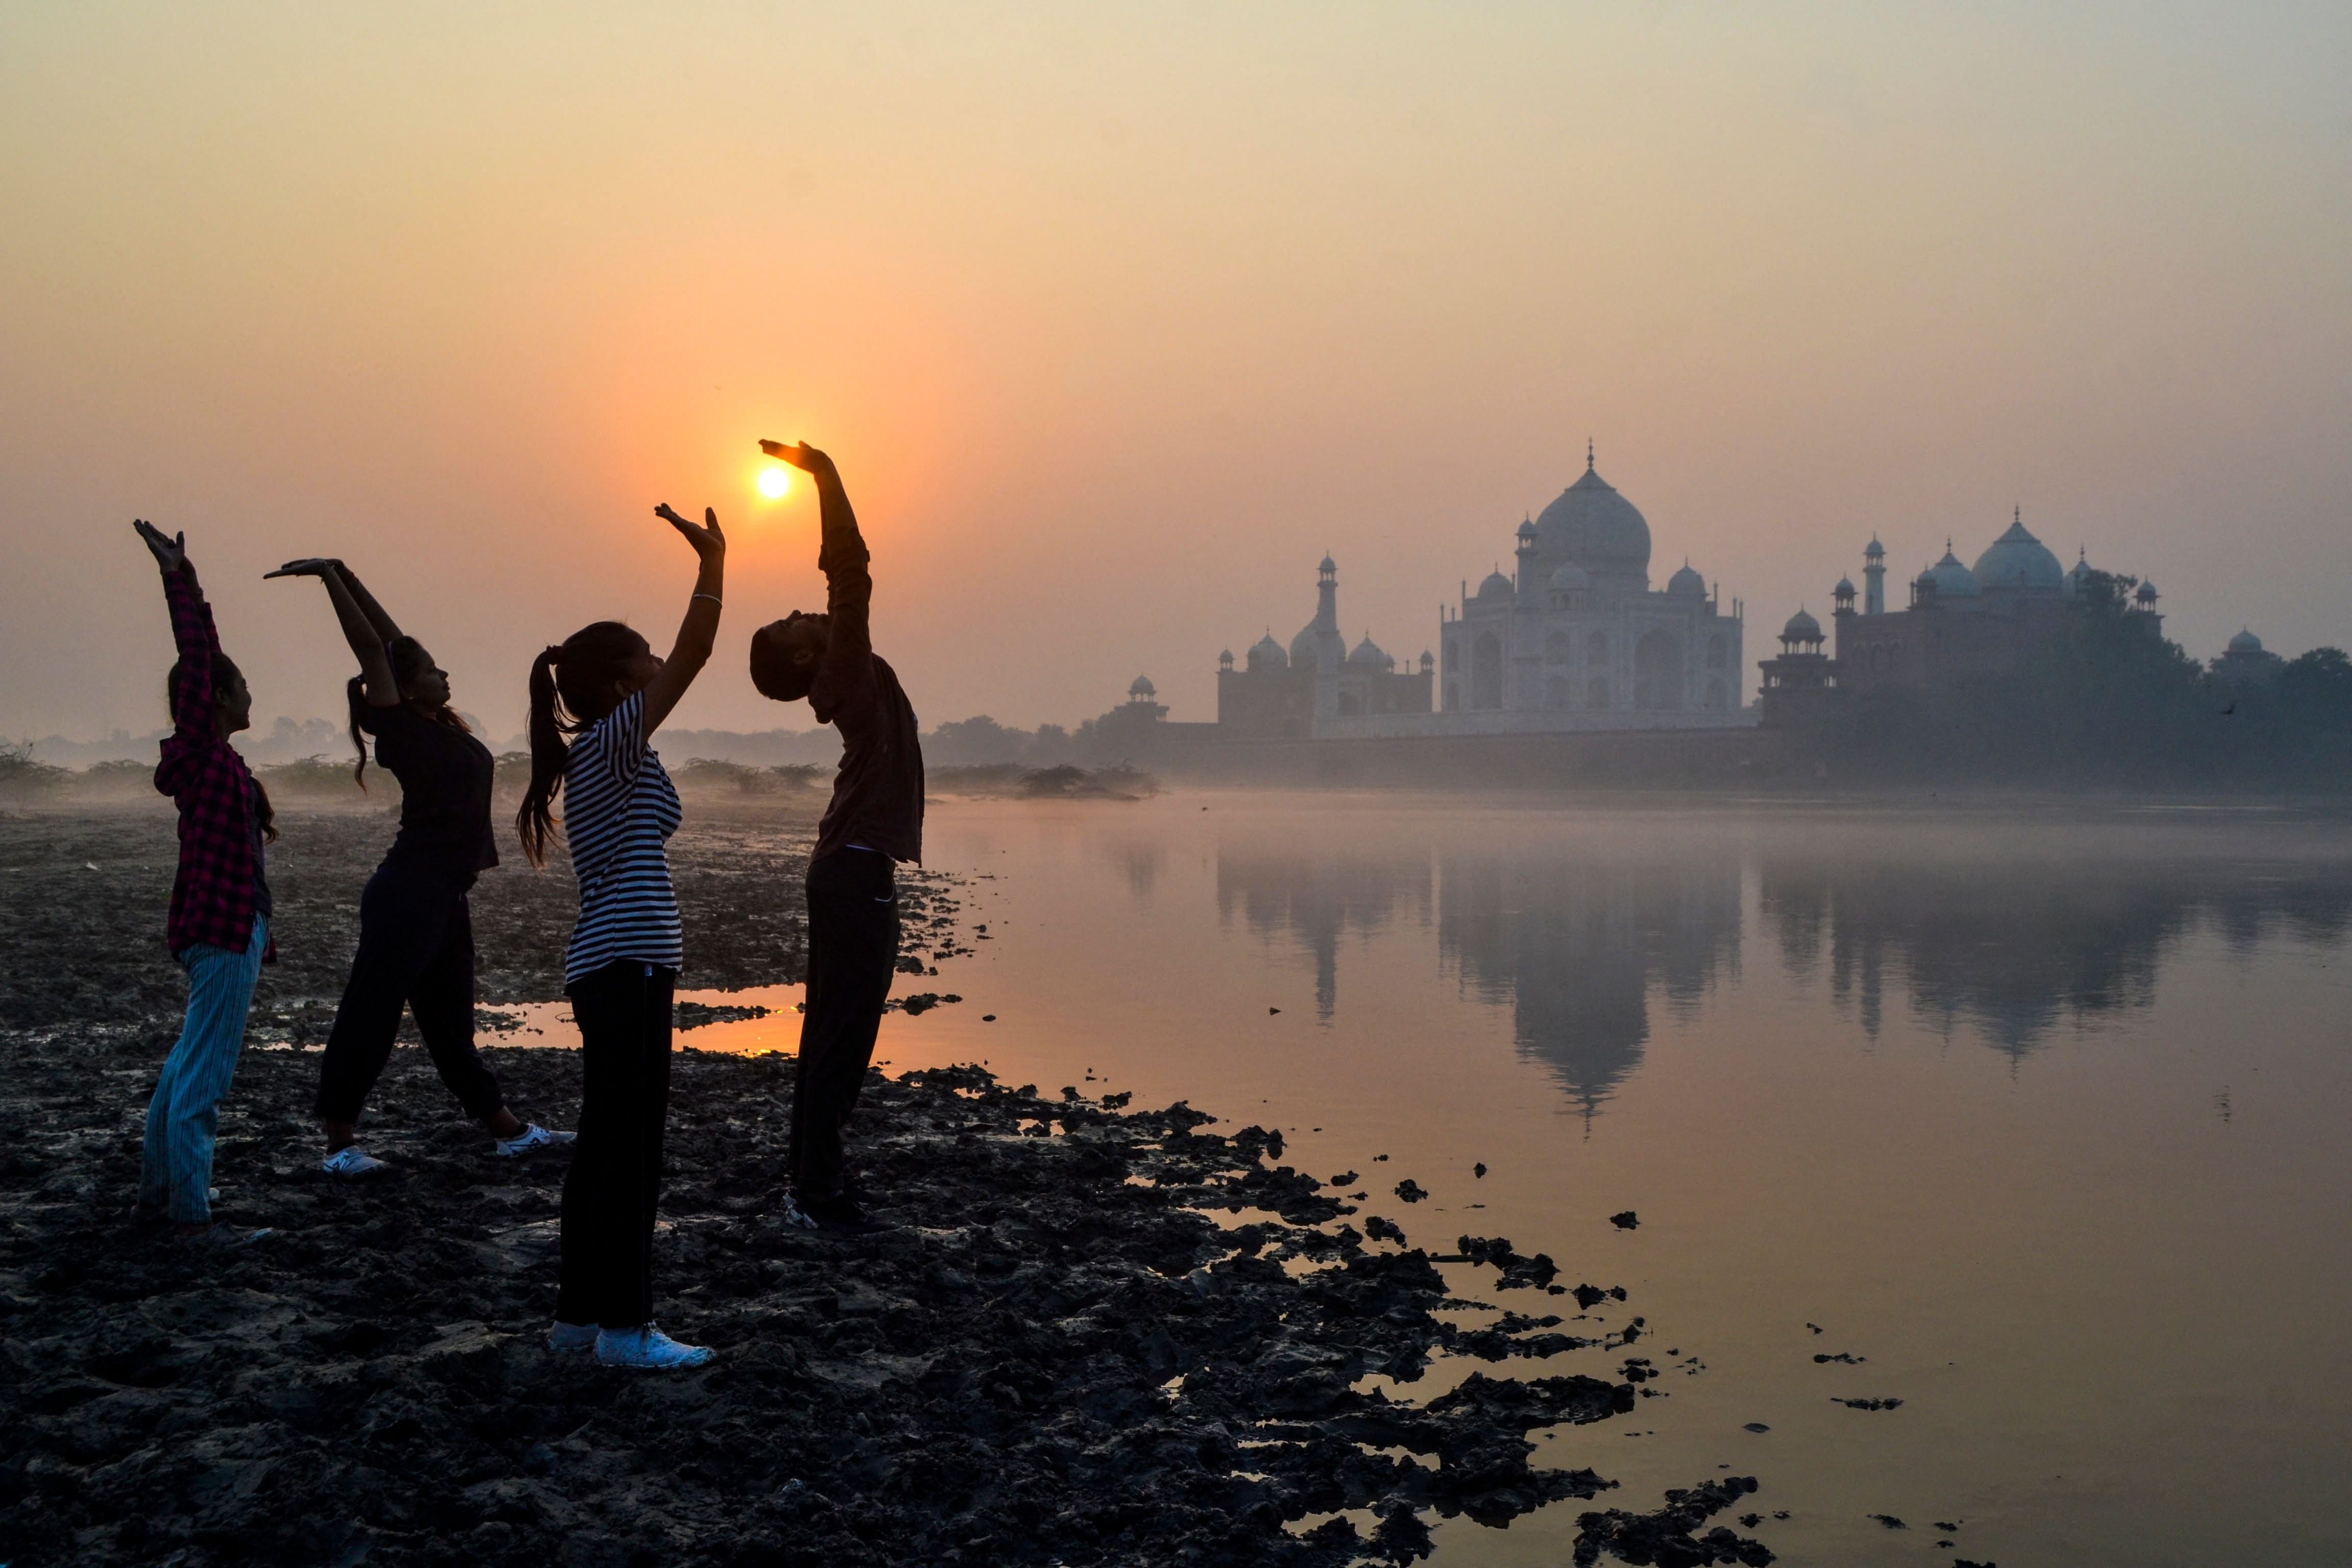 <p>Children exercise on the banks of the Yamuna River near the Taj Mahal in Agra at sunrise</p>